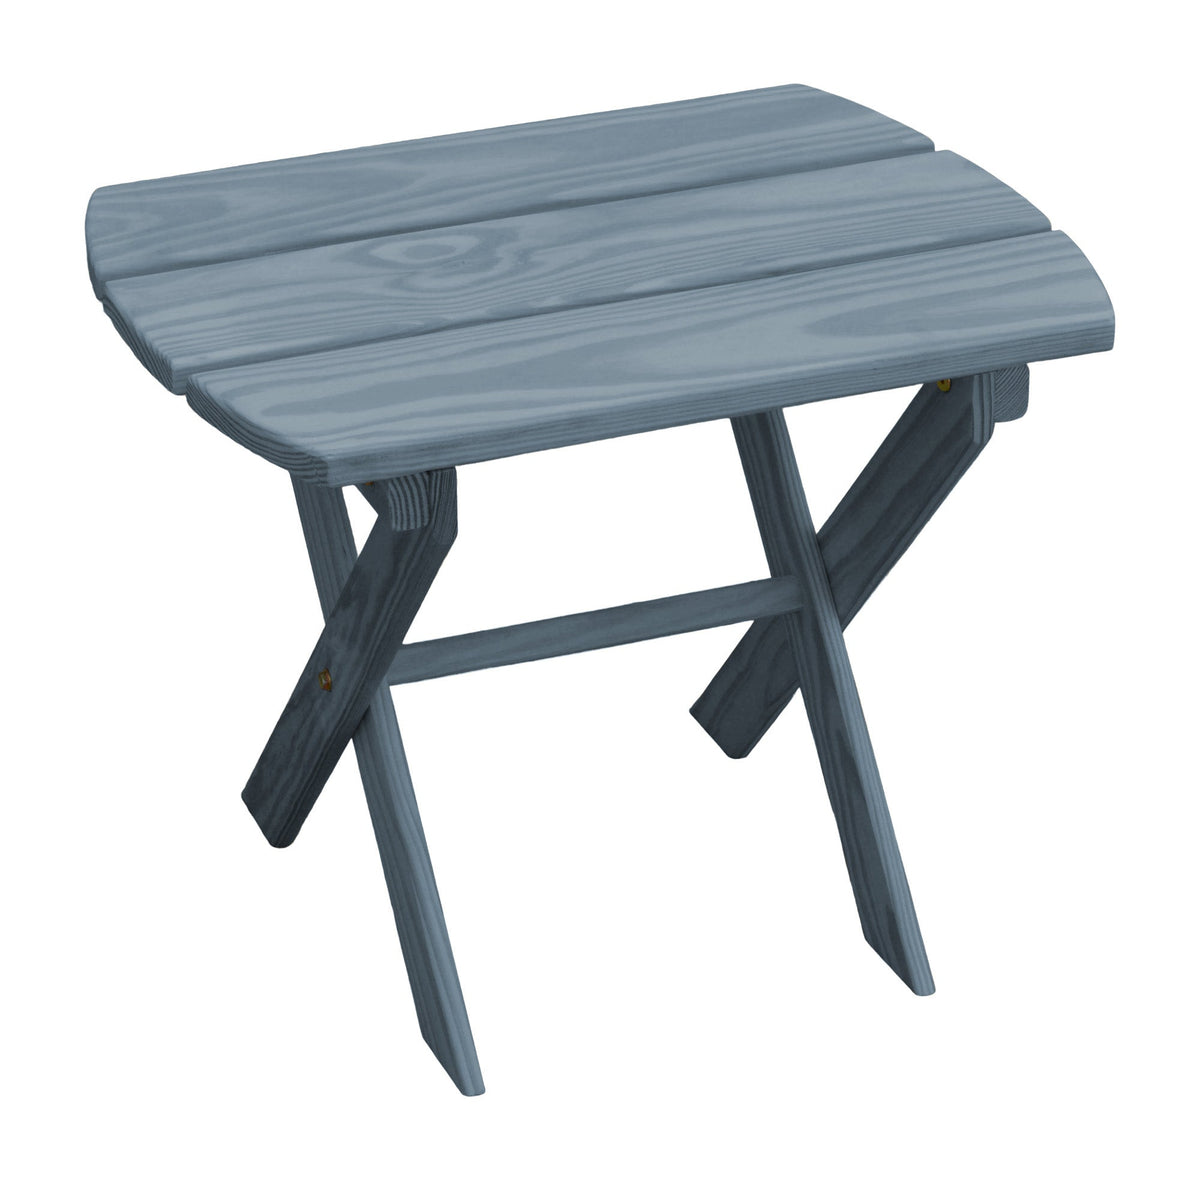 Solid Knotfree Yellow Pine Folding Oval End Table Outdoor Table Gray Stain